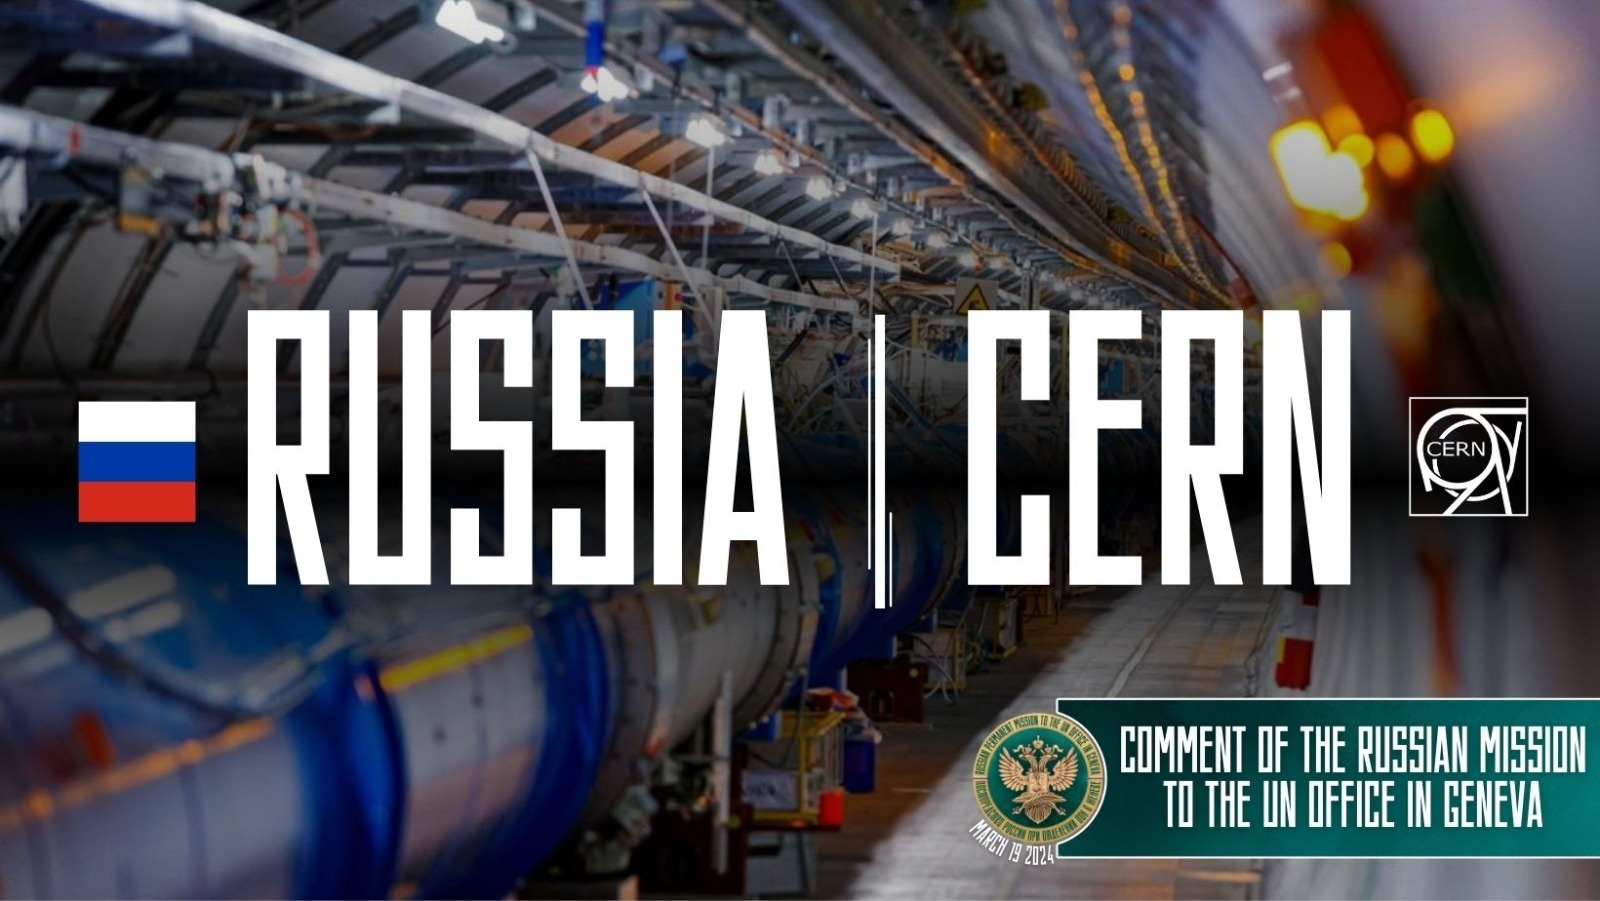 Russian Mission to the UN in Geneva comments on G|O's CERN exclusive investigation